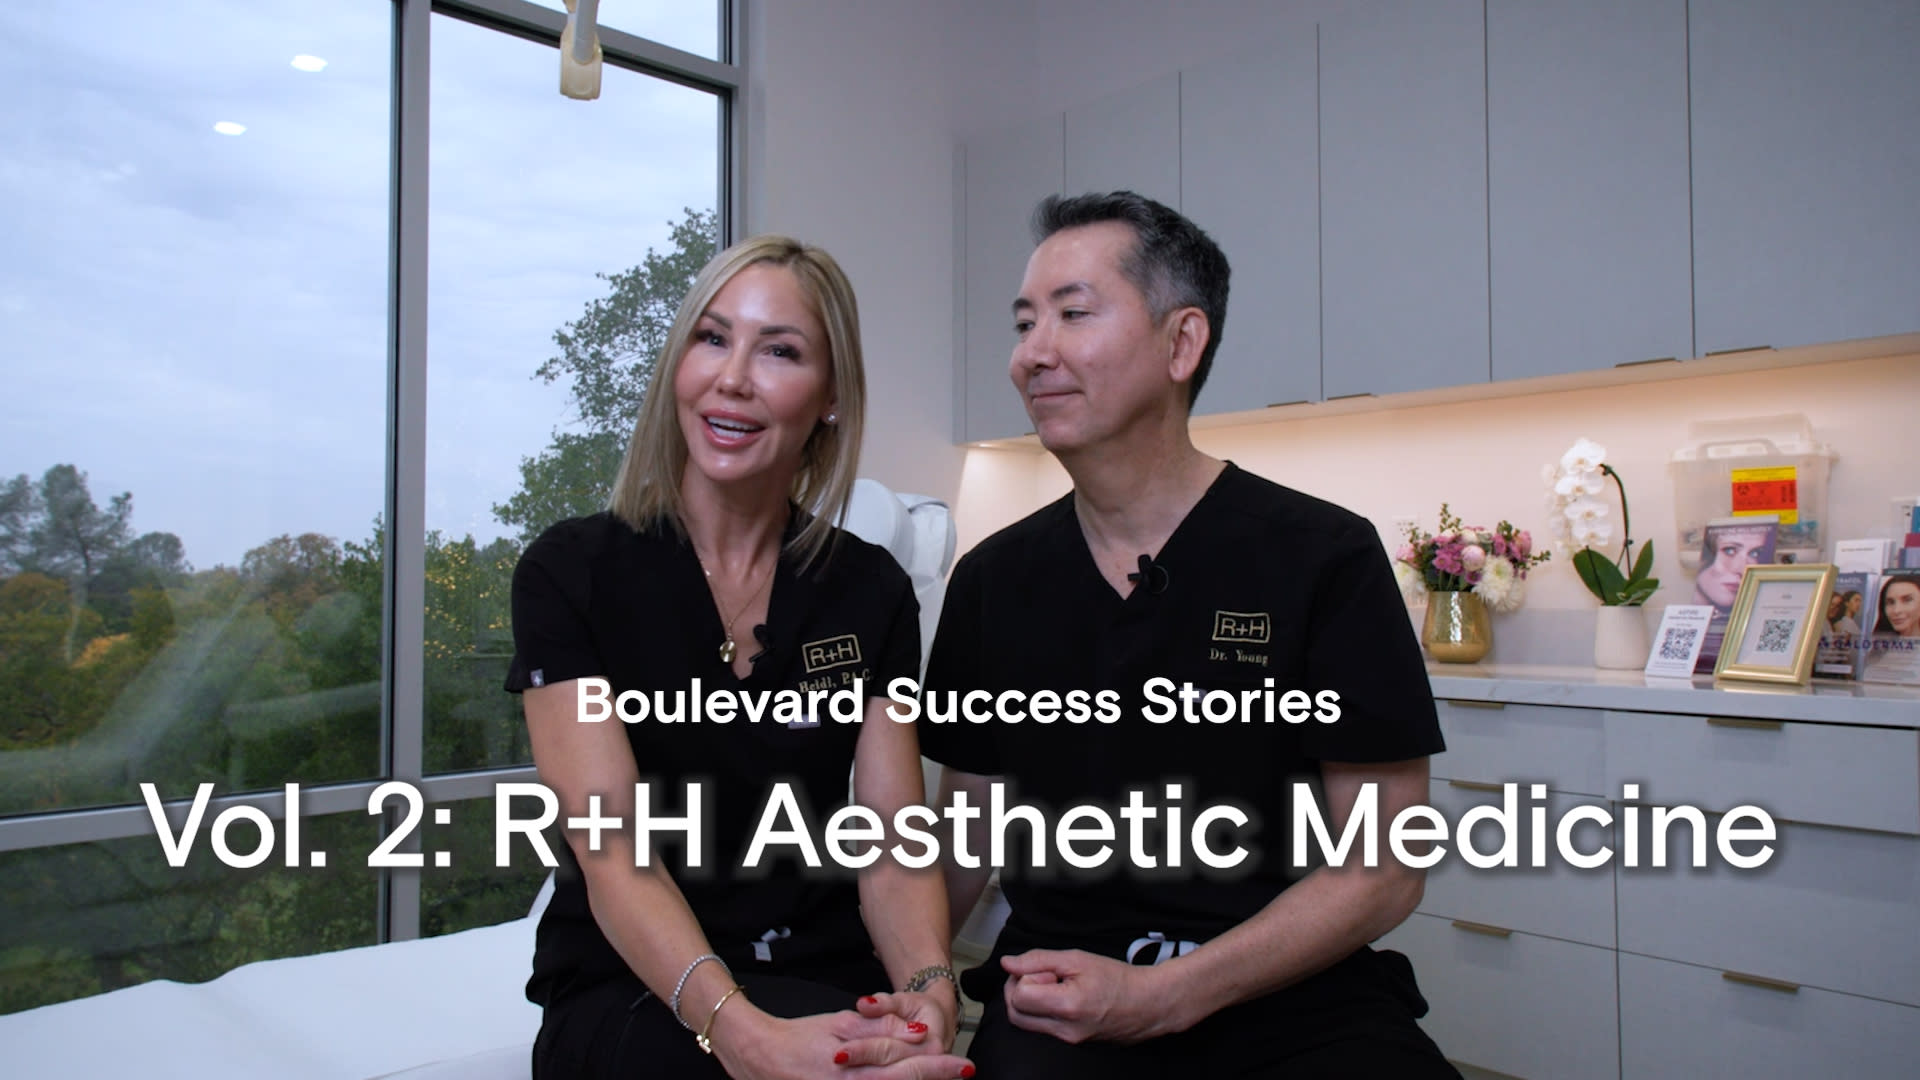 R+H Aesthetic Medicine is Northern California's premier luxury medical spa. At R+H, they provide the most advanced, industry leading, and safe aesthetic treatments, tailored to fit your individual needs. They believe in bringing out the inner beauty of our patients in a luxurious environment with your ultimate comfort, discretion, and convenience in mind. Their team of caring professionals will provide you with personalized attention from the moment you schedule your appointment, and will be with you every step of the way. 